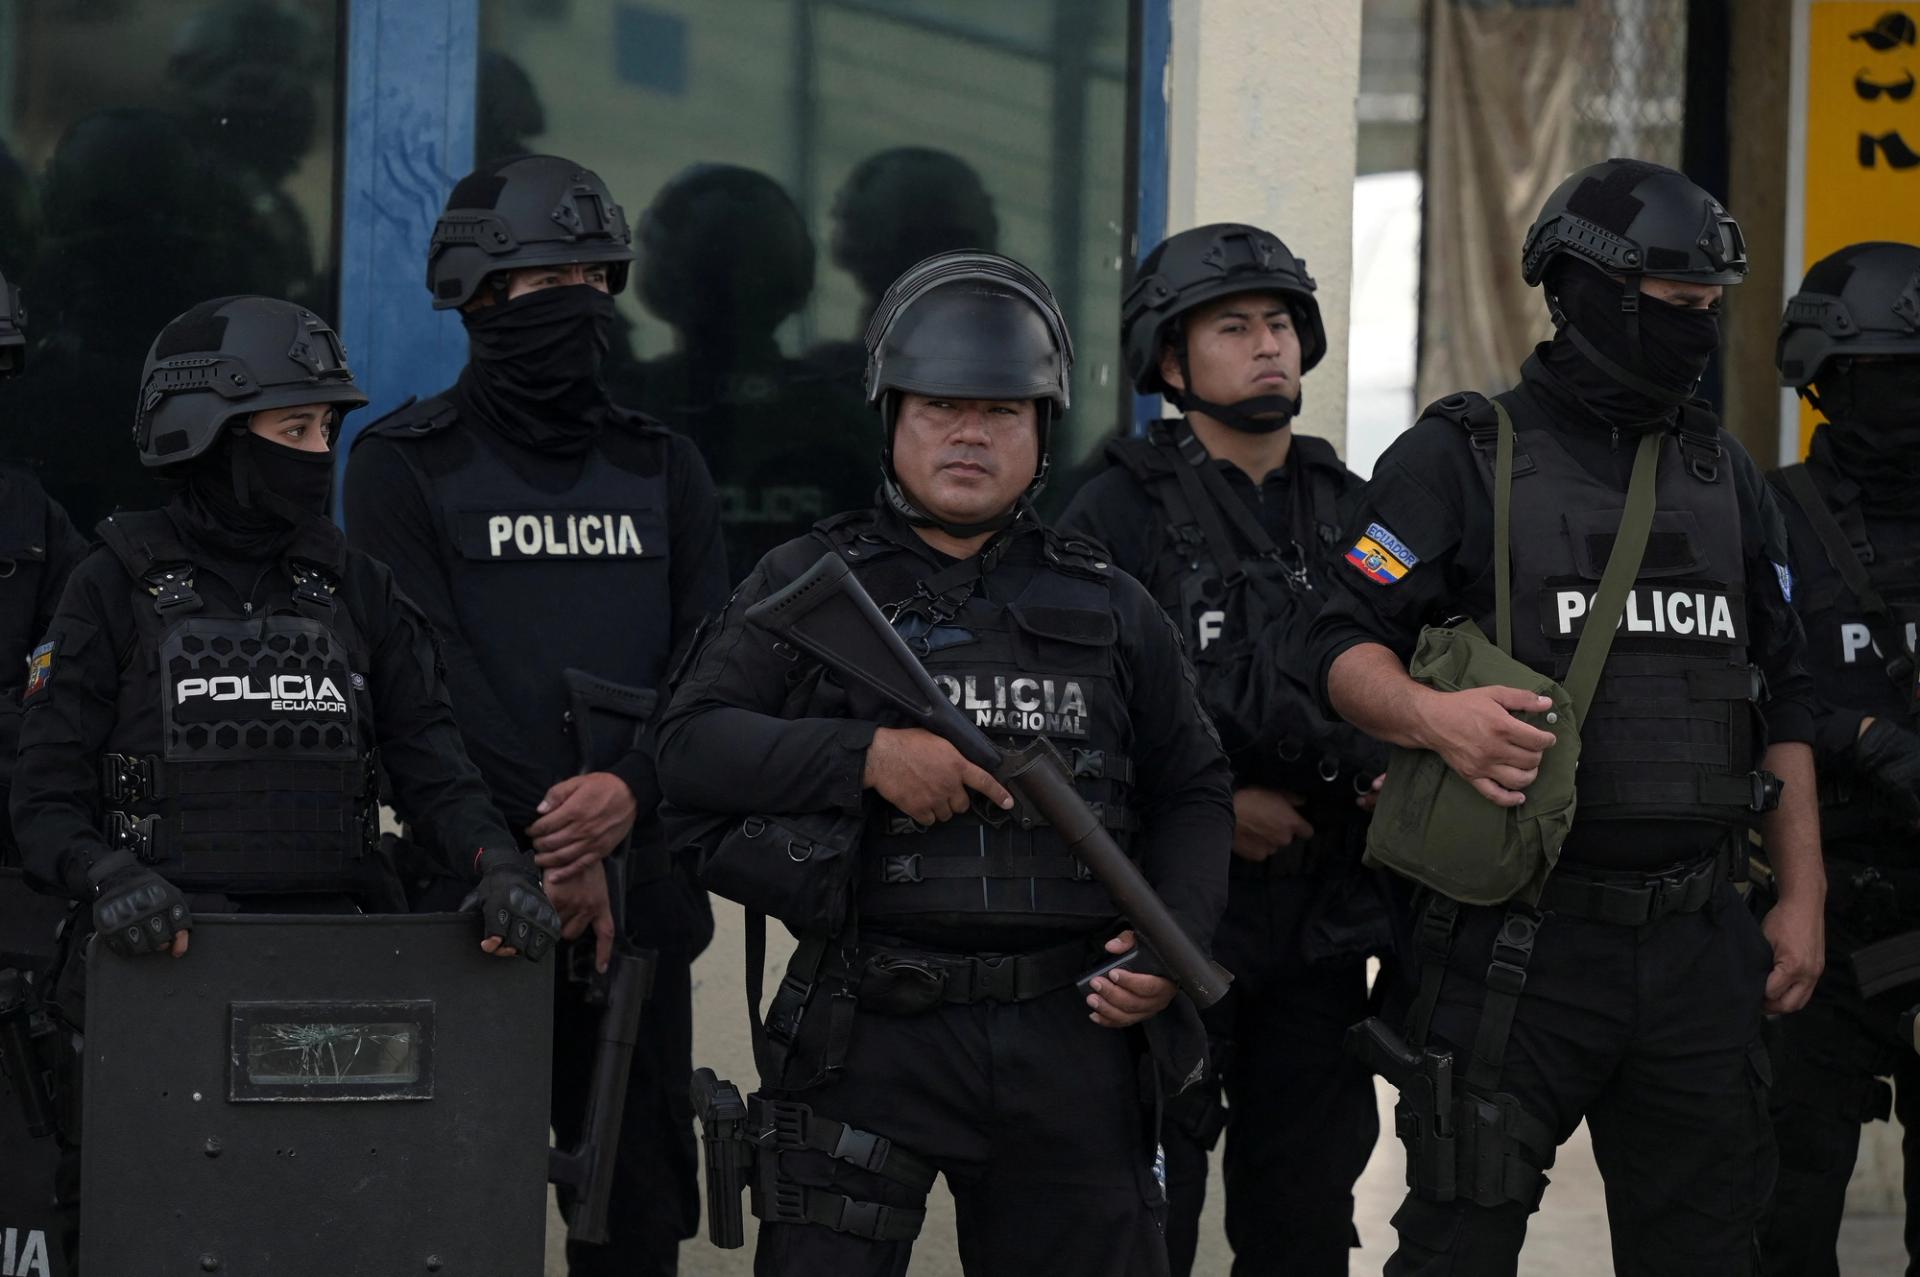 Police officers stand guard as Ecuador's former Vice President Jorge Glas is expected to arrive at the La Roca Prison, after Ecuadorean forces raided Mexico's embassy to arrest Glas.